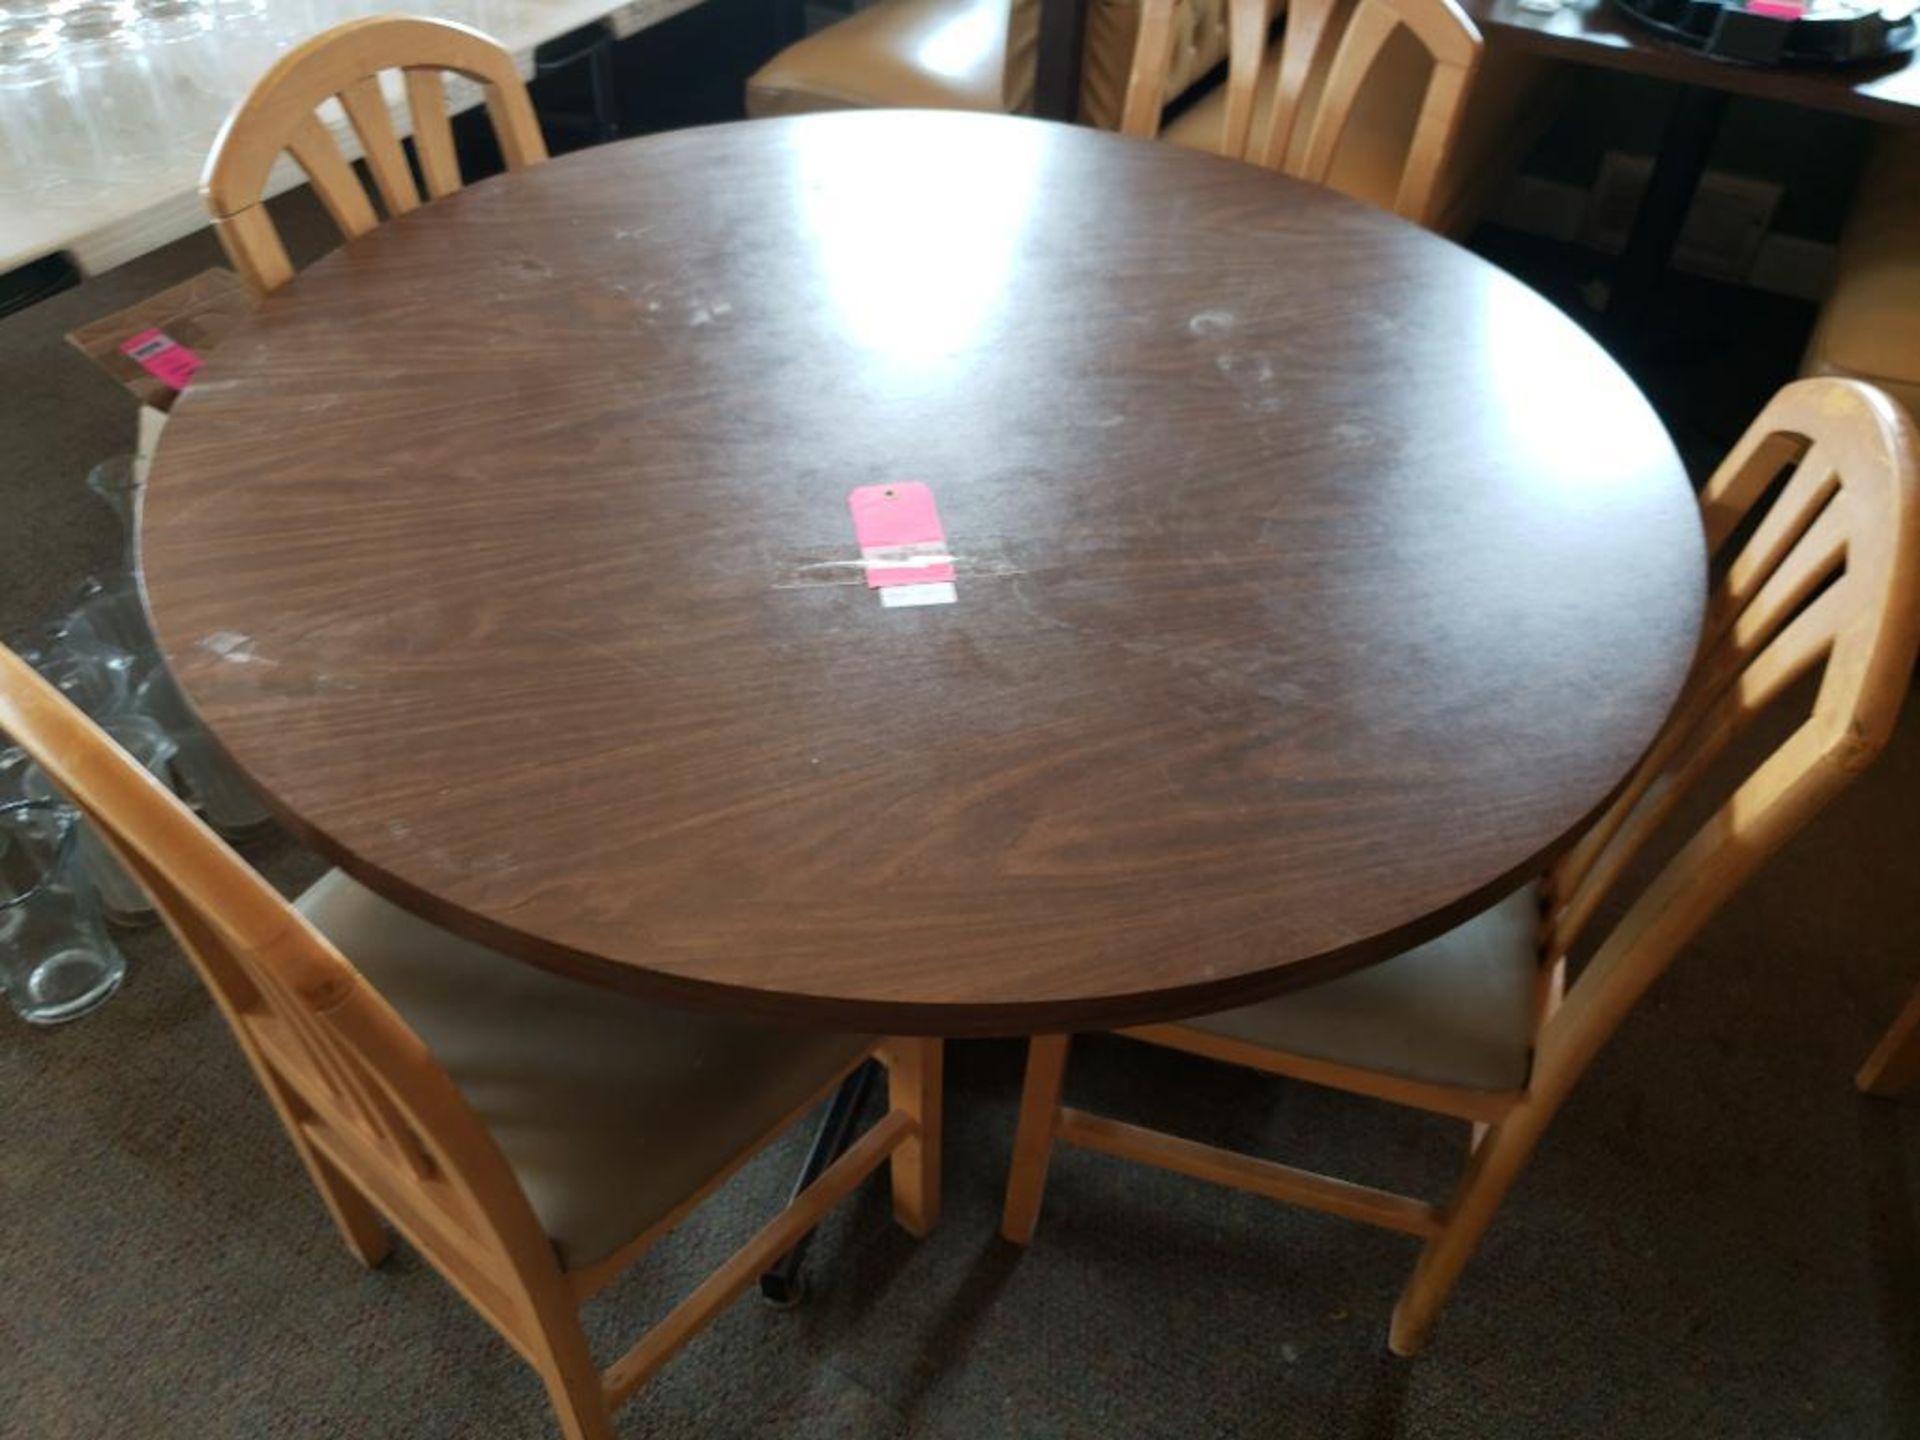 Table with 4 chairs. Table size 47in round.